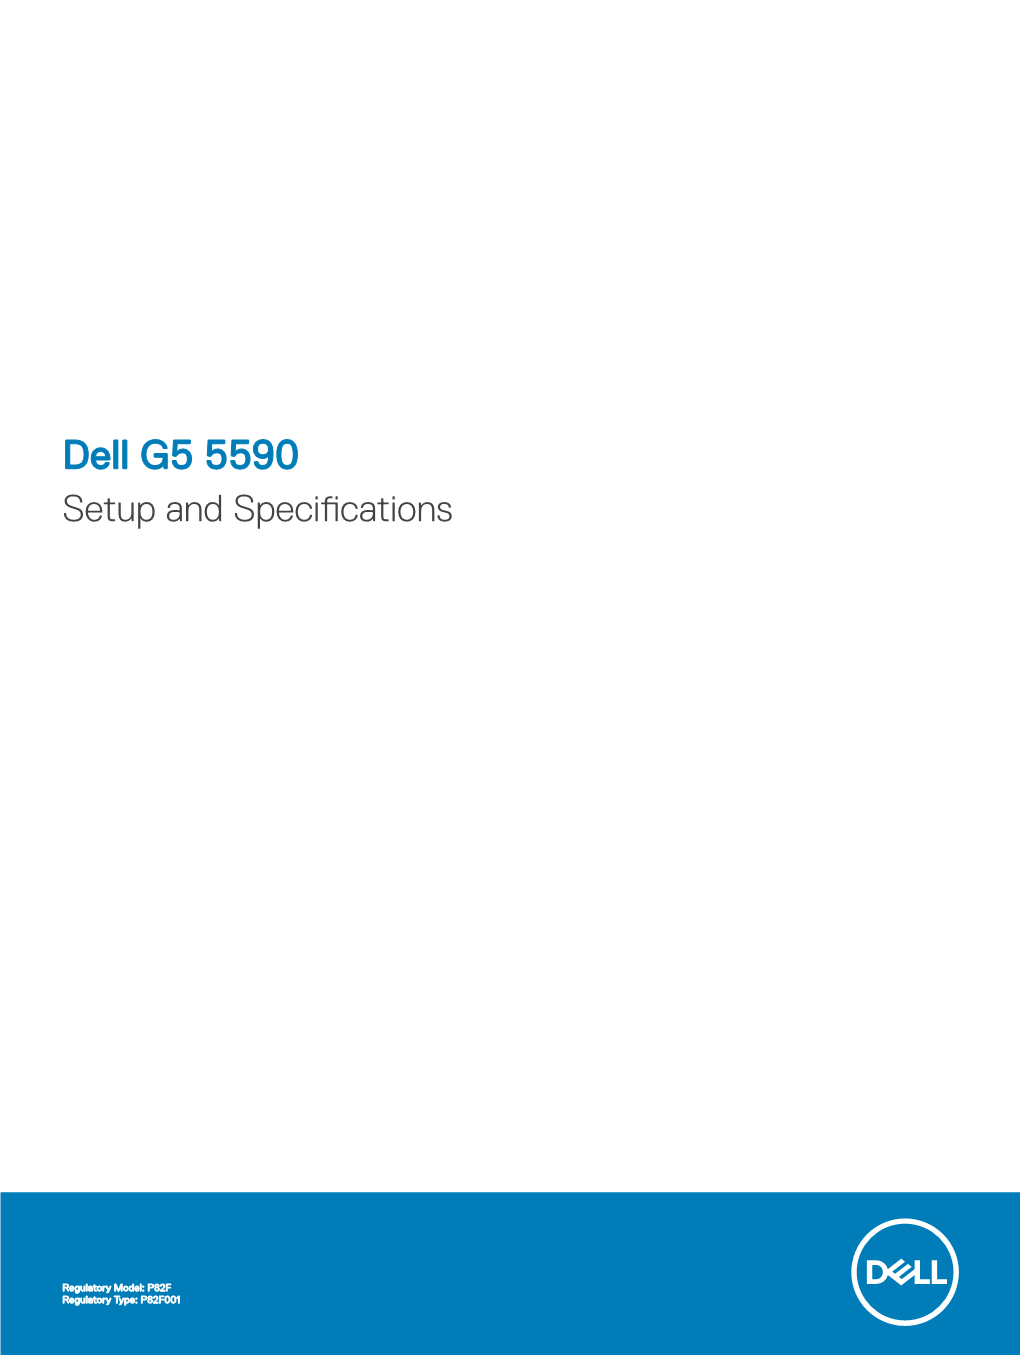 Dell G5 5590 Setup and Specifications